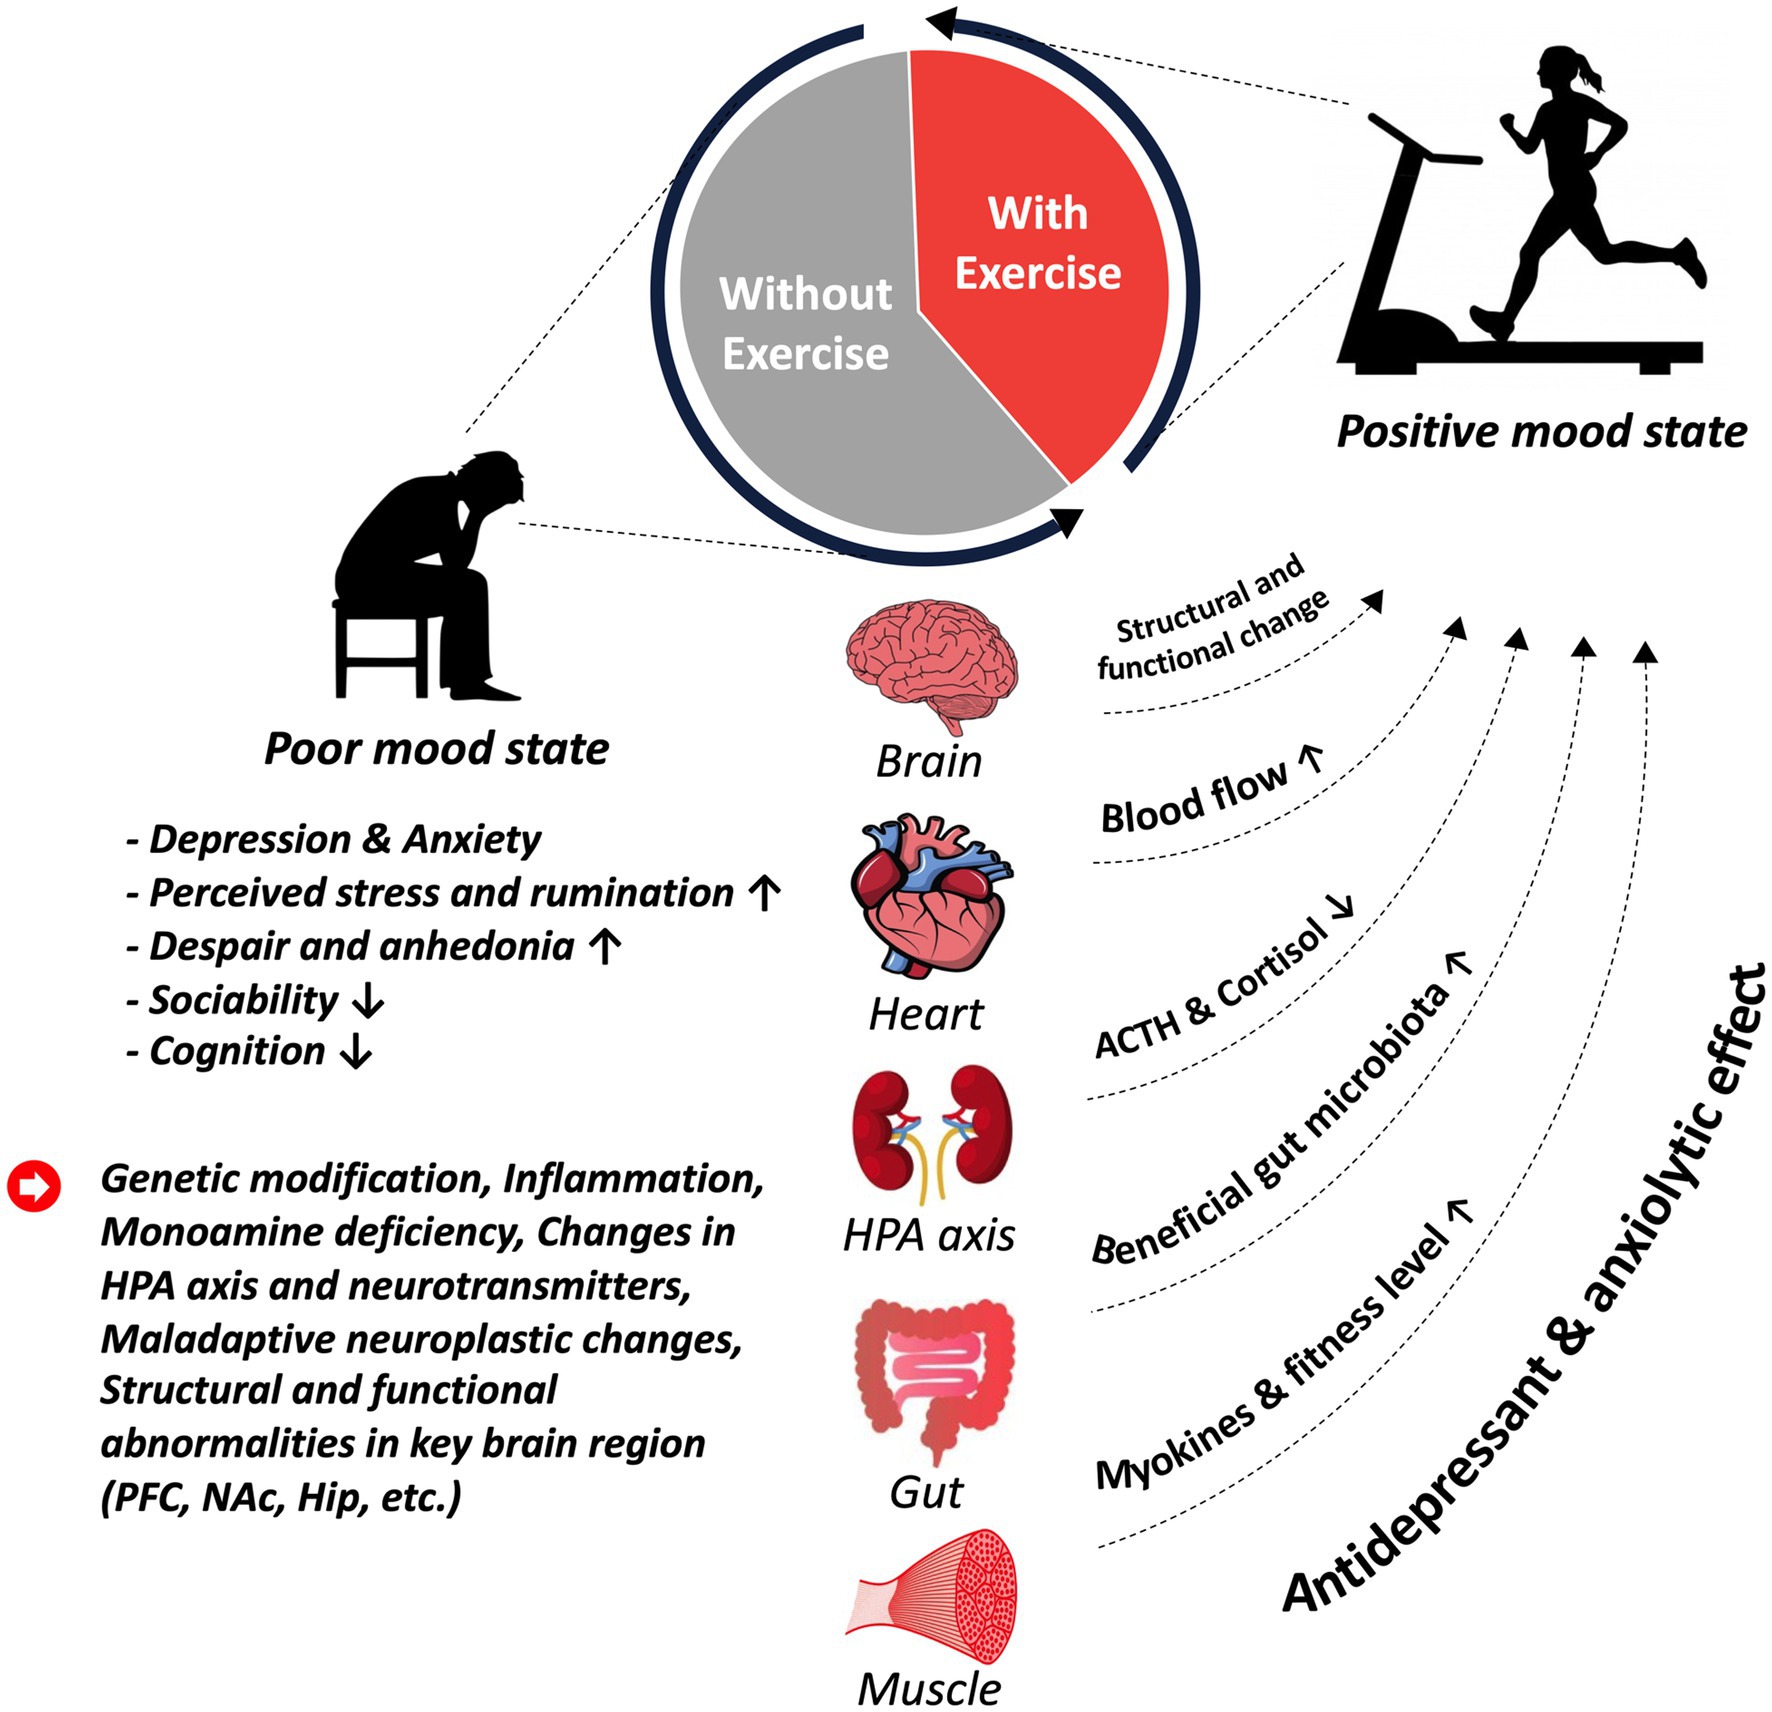 Effects of aerobic exercise on blood pressure in patients with  hypertension: a systematic review and dose-response meta-analysis of  randomized trials